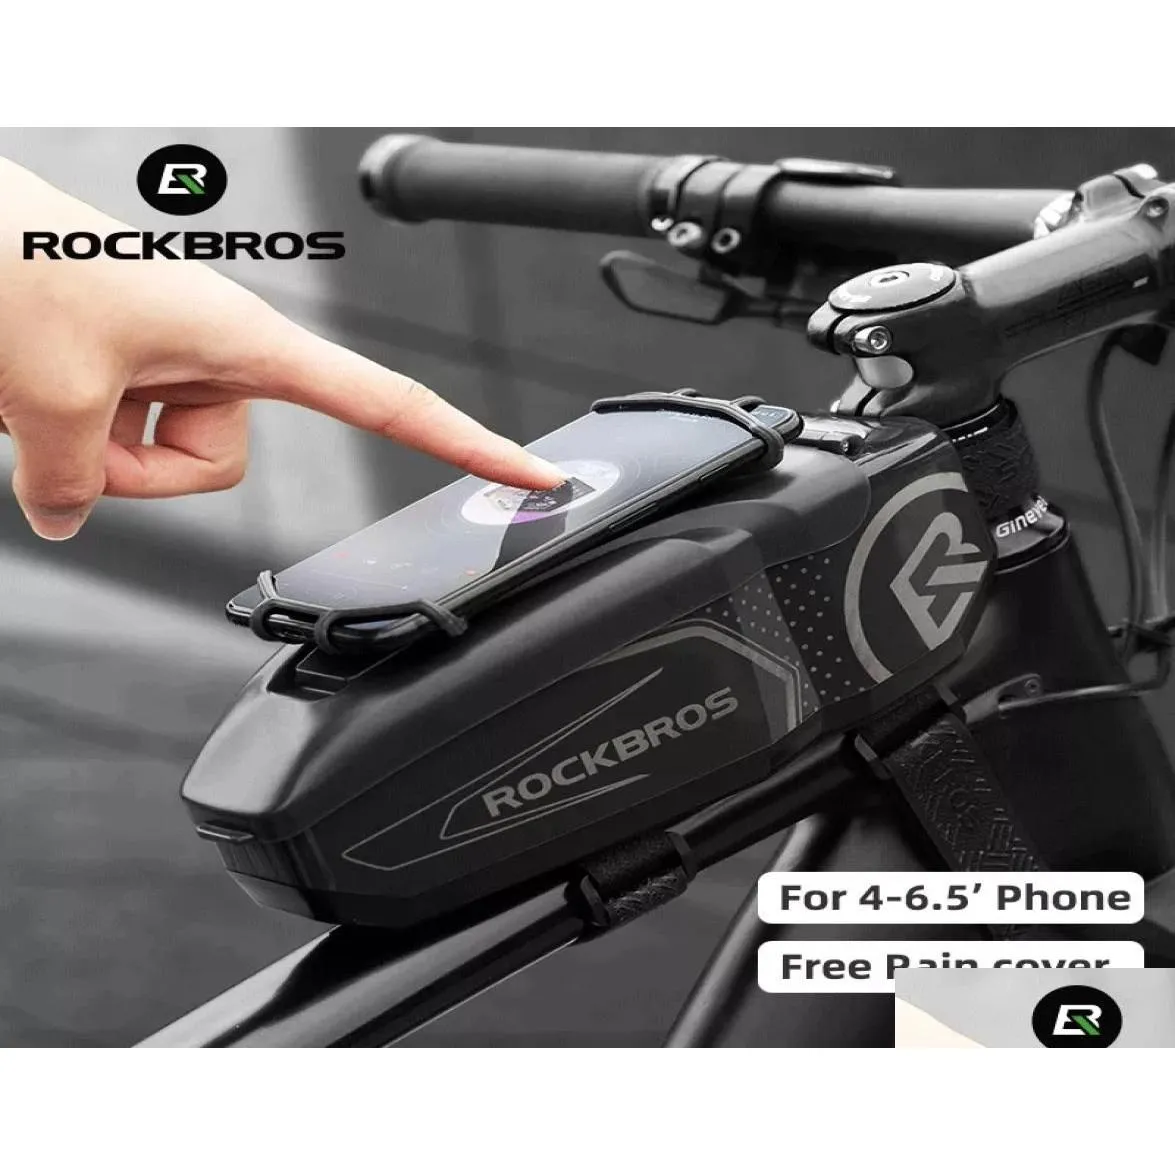 ROCKBROS Rainproof Bike Bag For 465quotFront Phone Bags Special PC Hard Shell With Rain Cover Motorcycle Cycling Accessor5677222